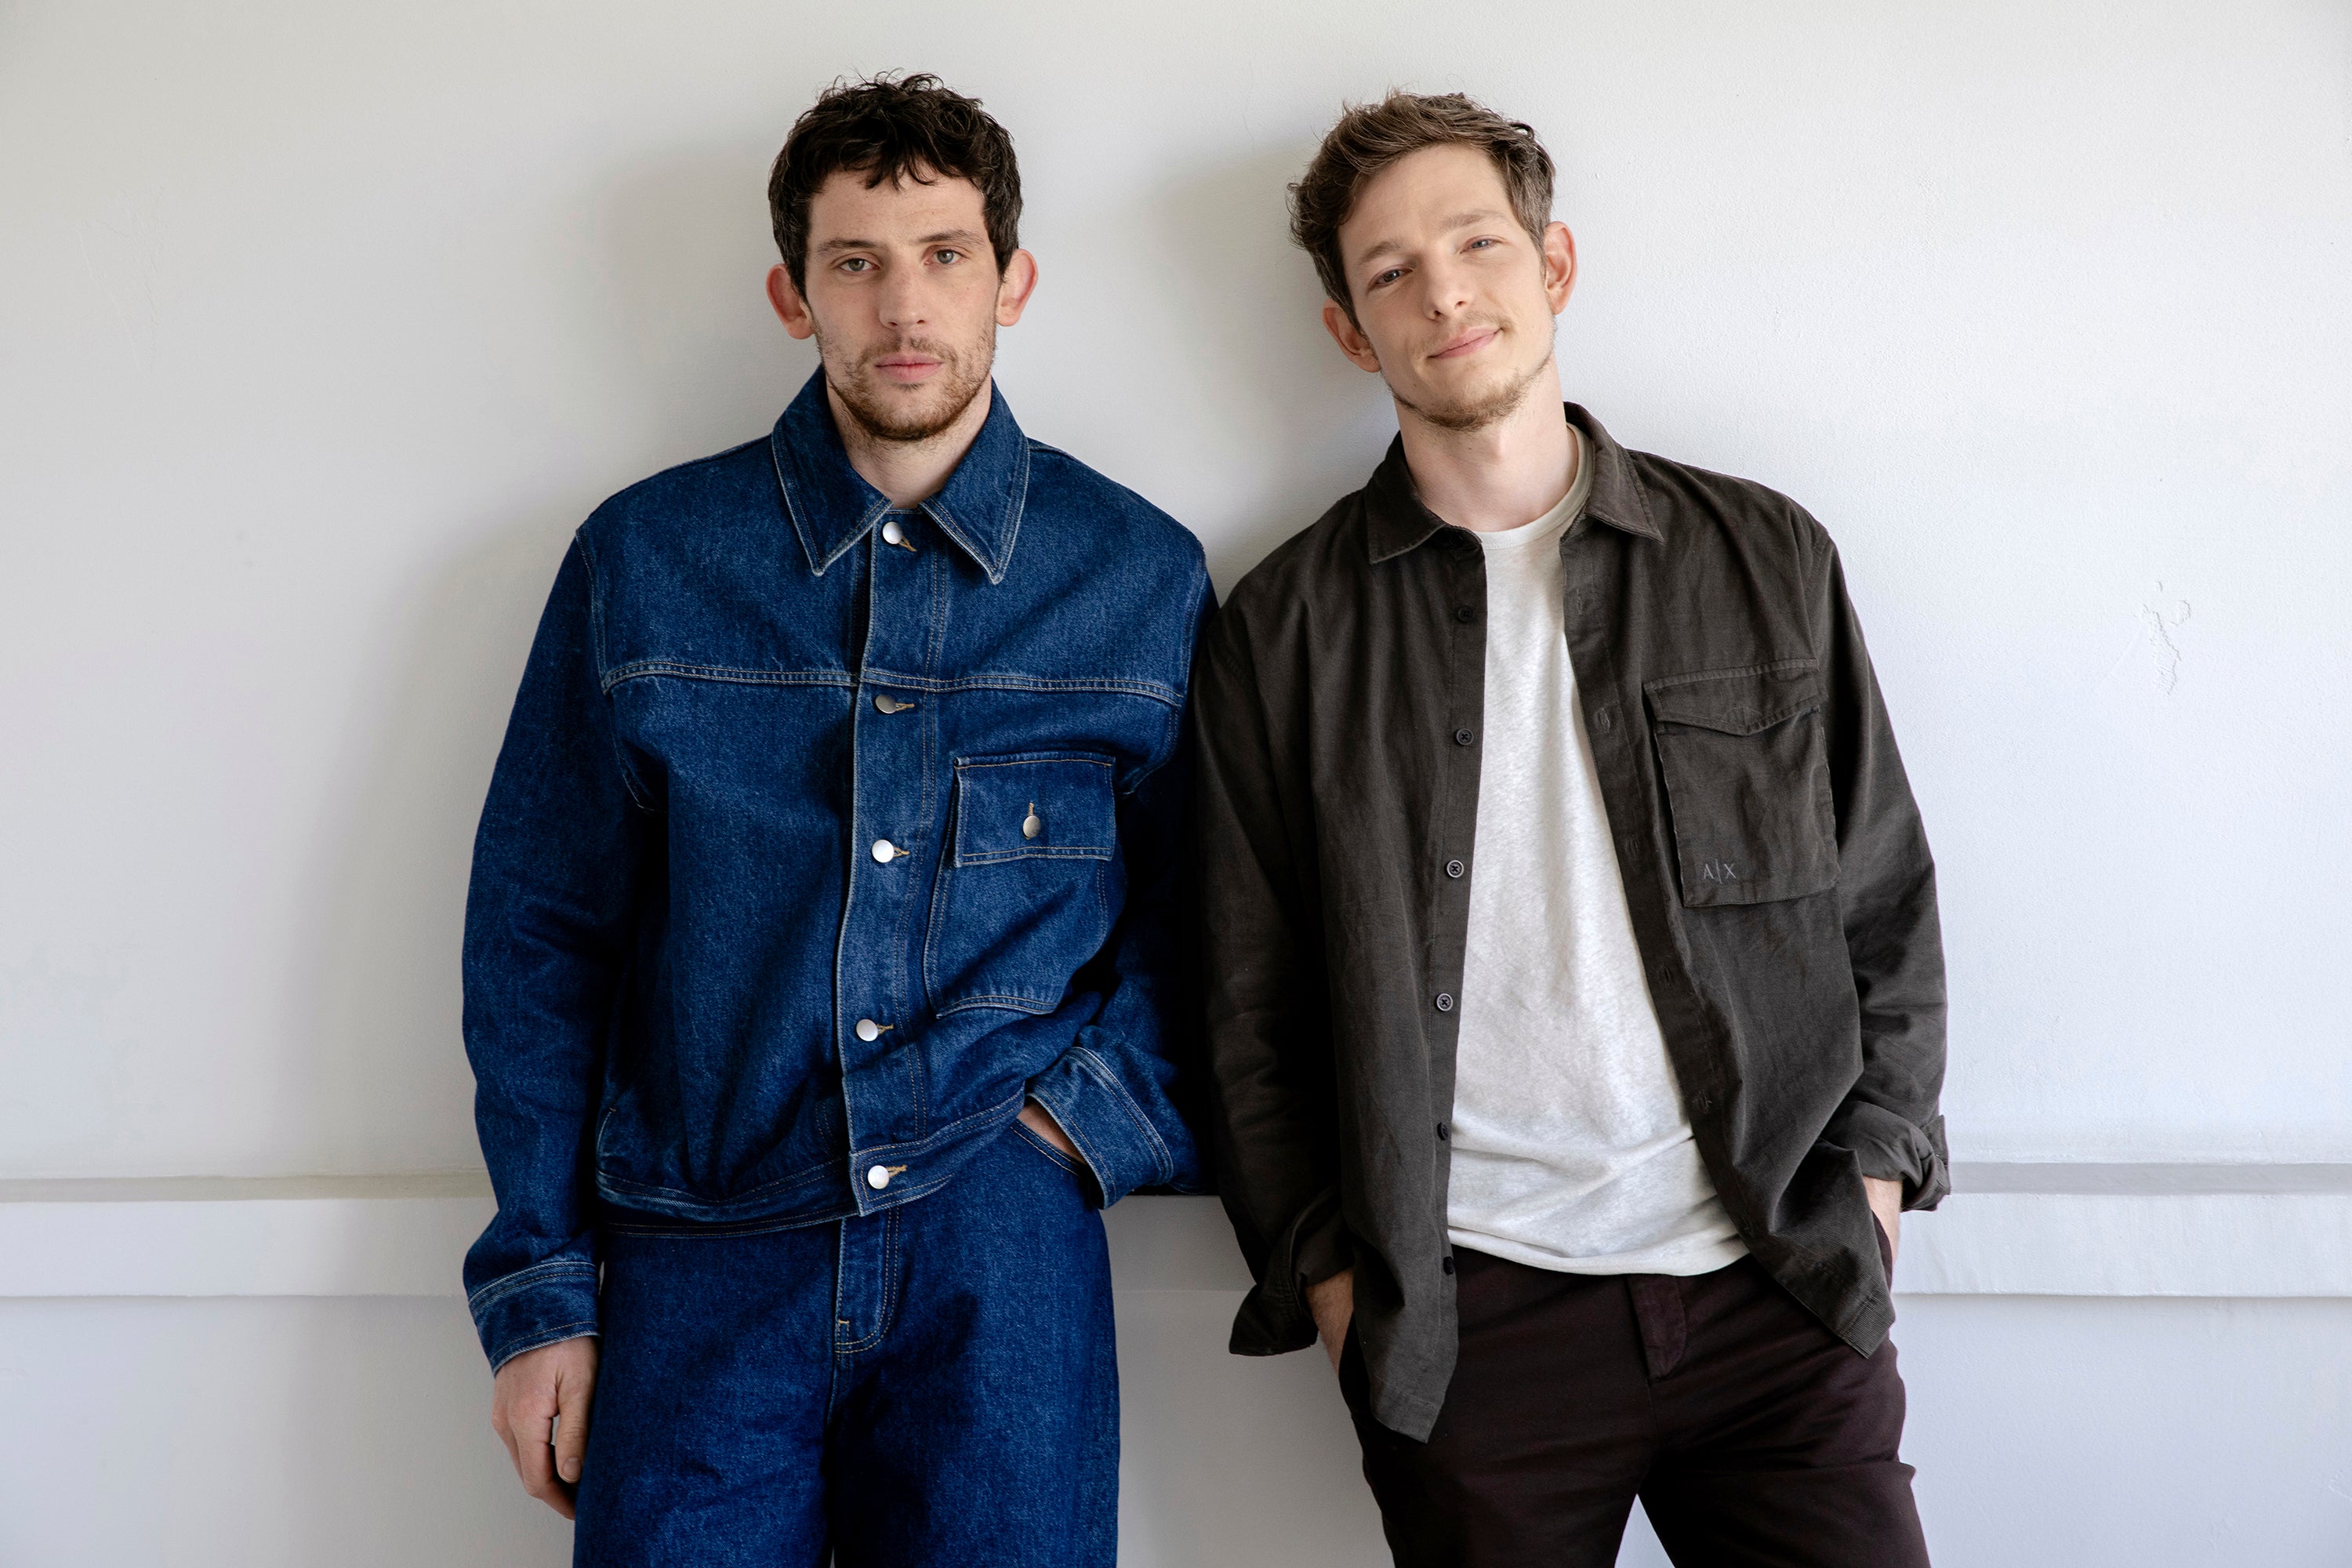 'Challengers' stars Josh O'Connor and Mike Faist are two celebrities du-jour who have been branded with the moniker they consider free.